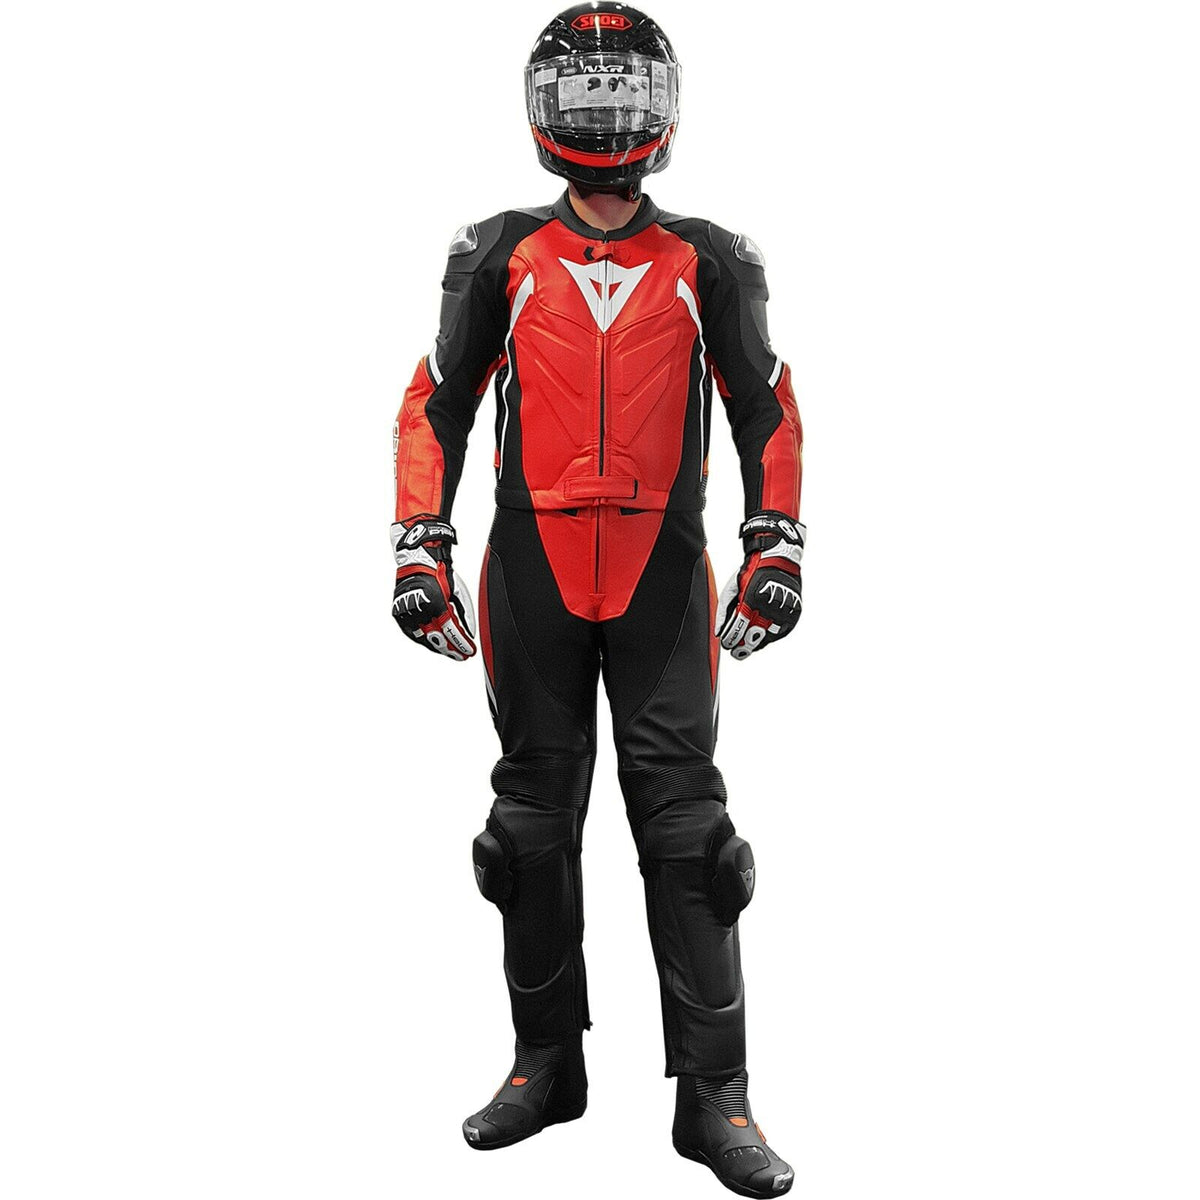 Black Red White Avro D2 Men's Two Piece Motorcycle Leather Racing Suit CE Protections Motorcycle Racing Suit   